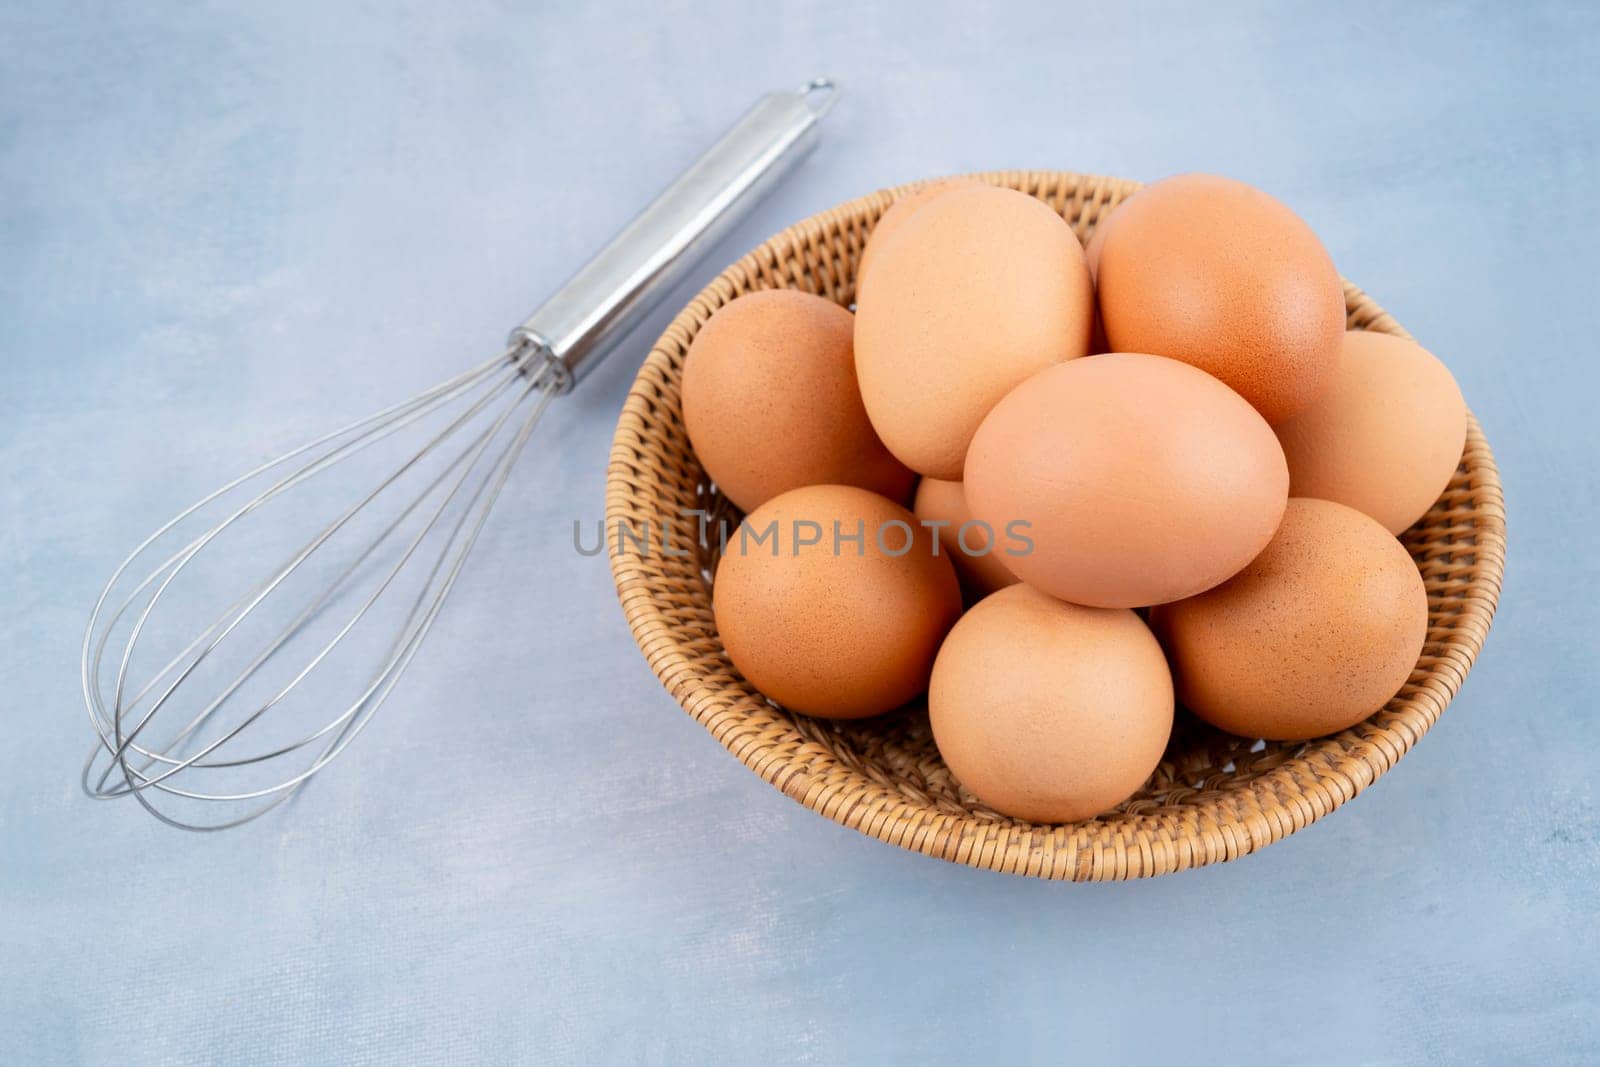 The chicken eggs with egg whisk on blue wooden background.  by Gamjai